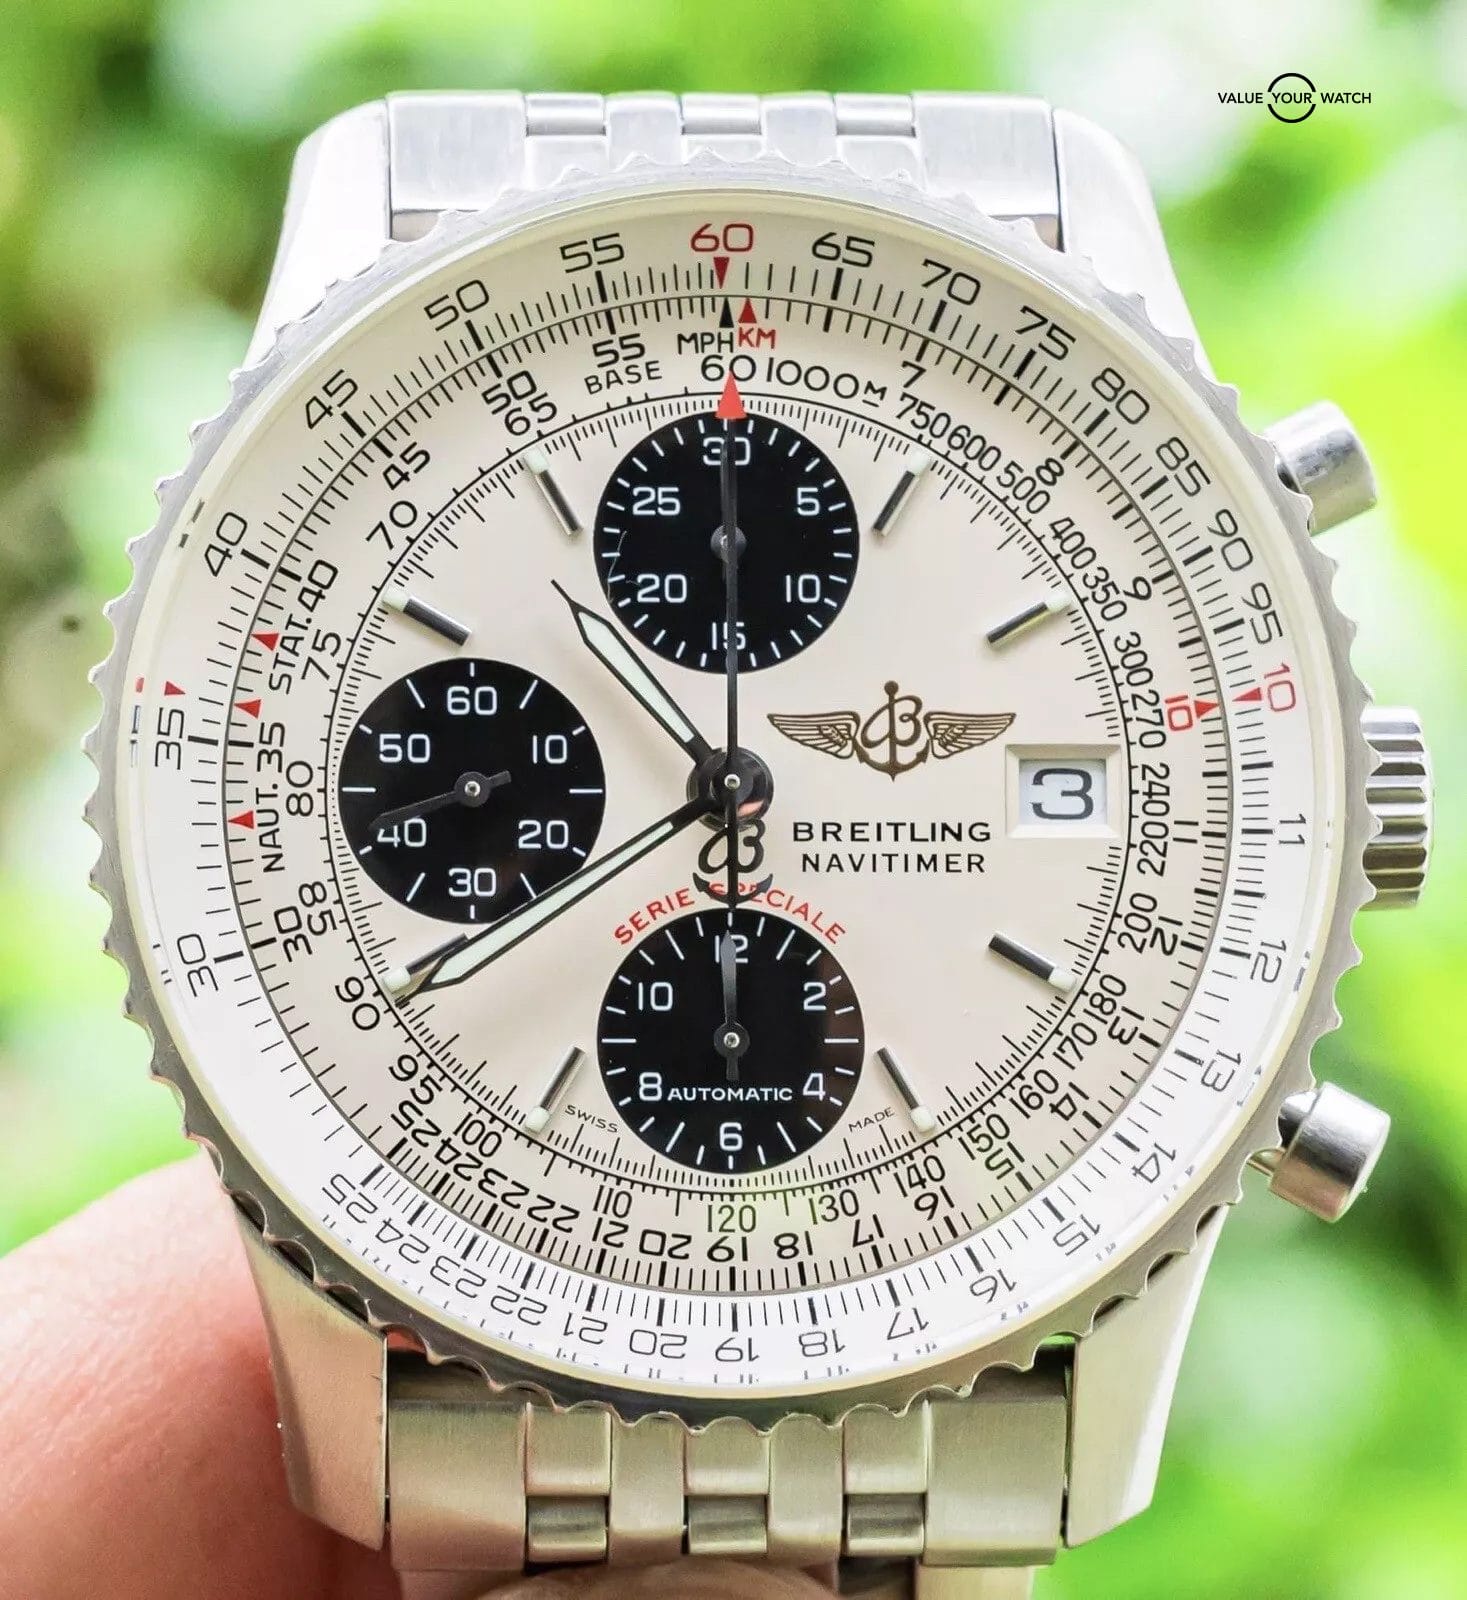 Breitling Navitimer Fighters Special Edition “Panda” Silver/Cream Dial  A13330 | Value Your Watch